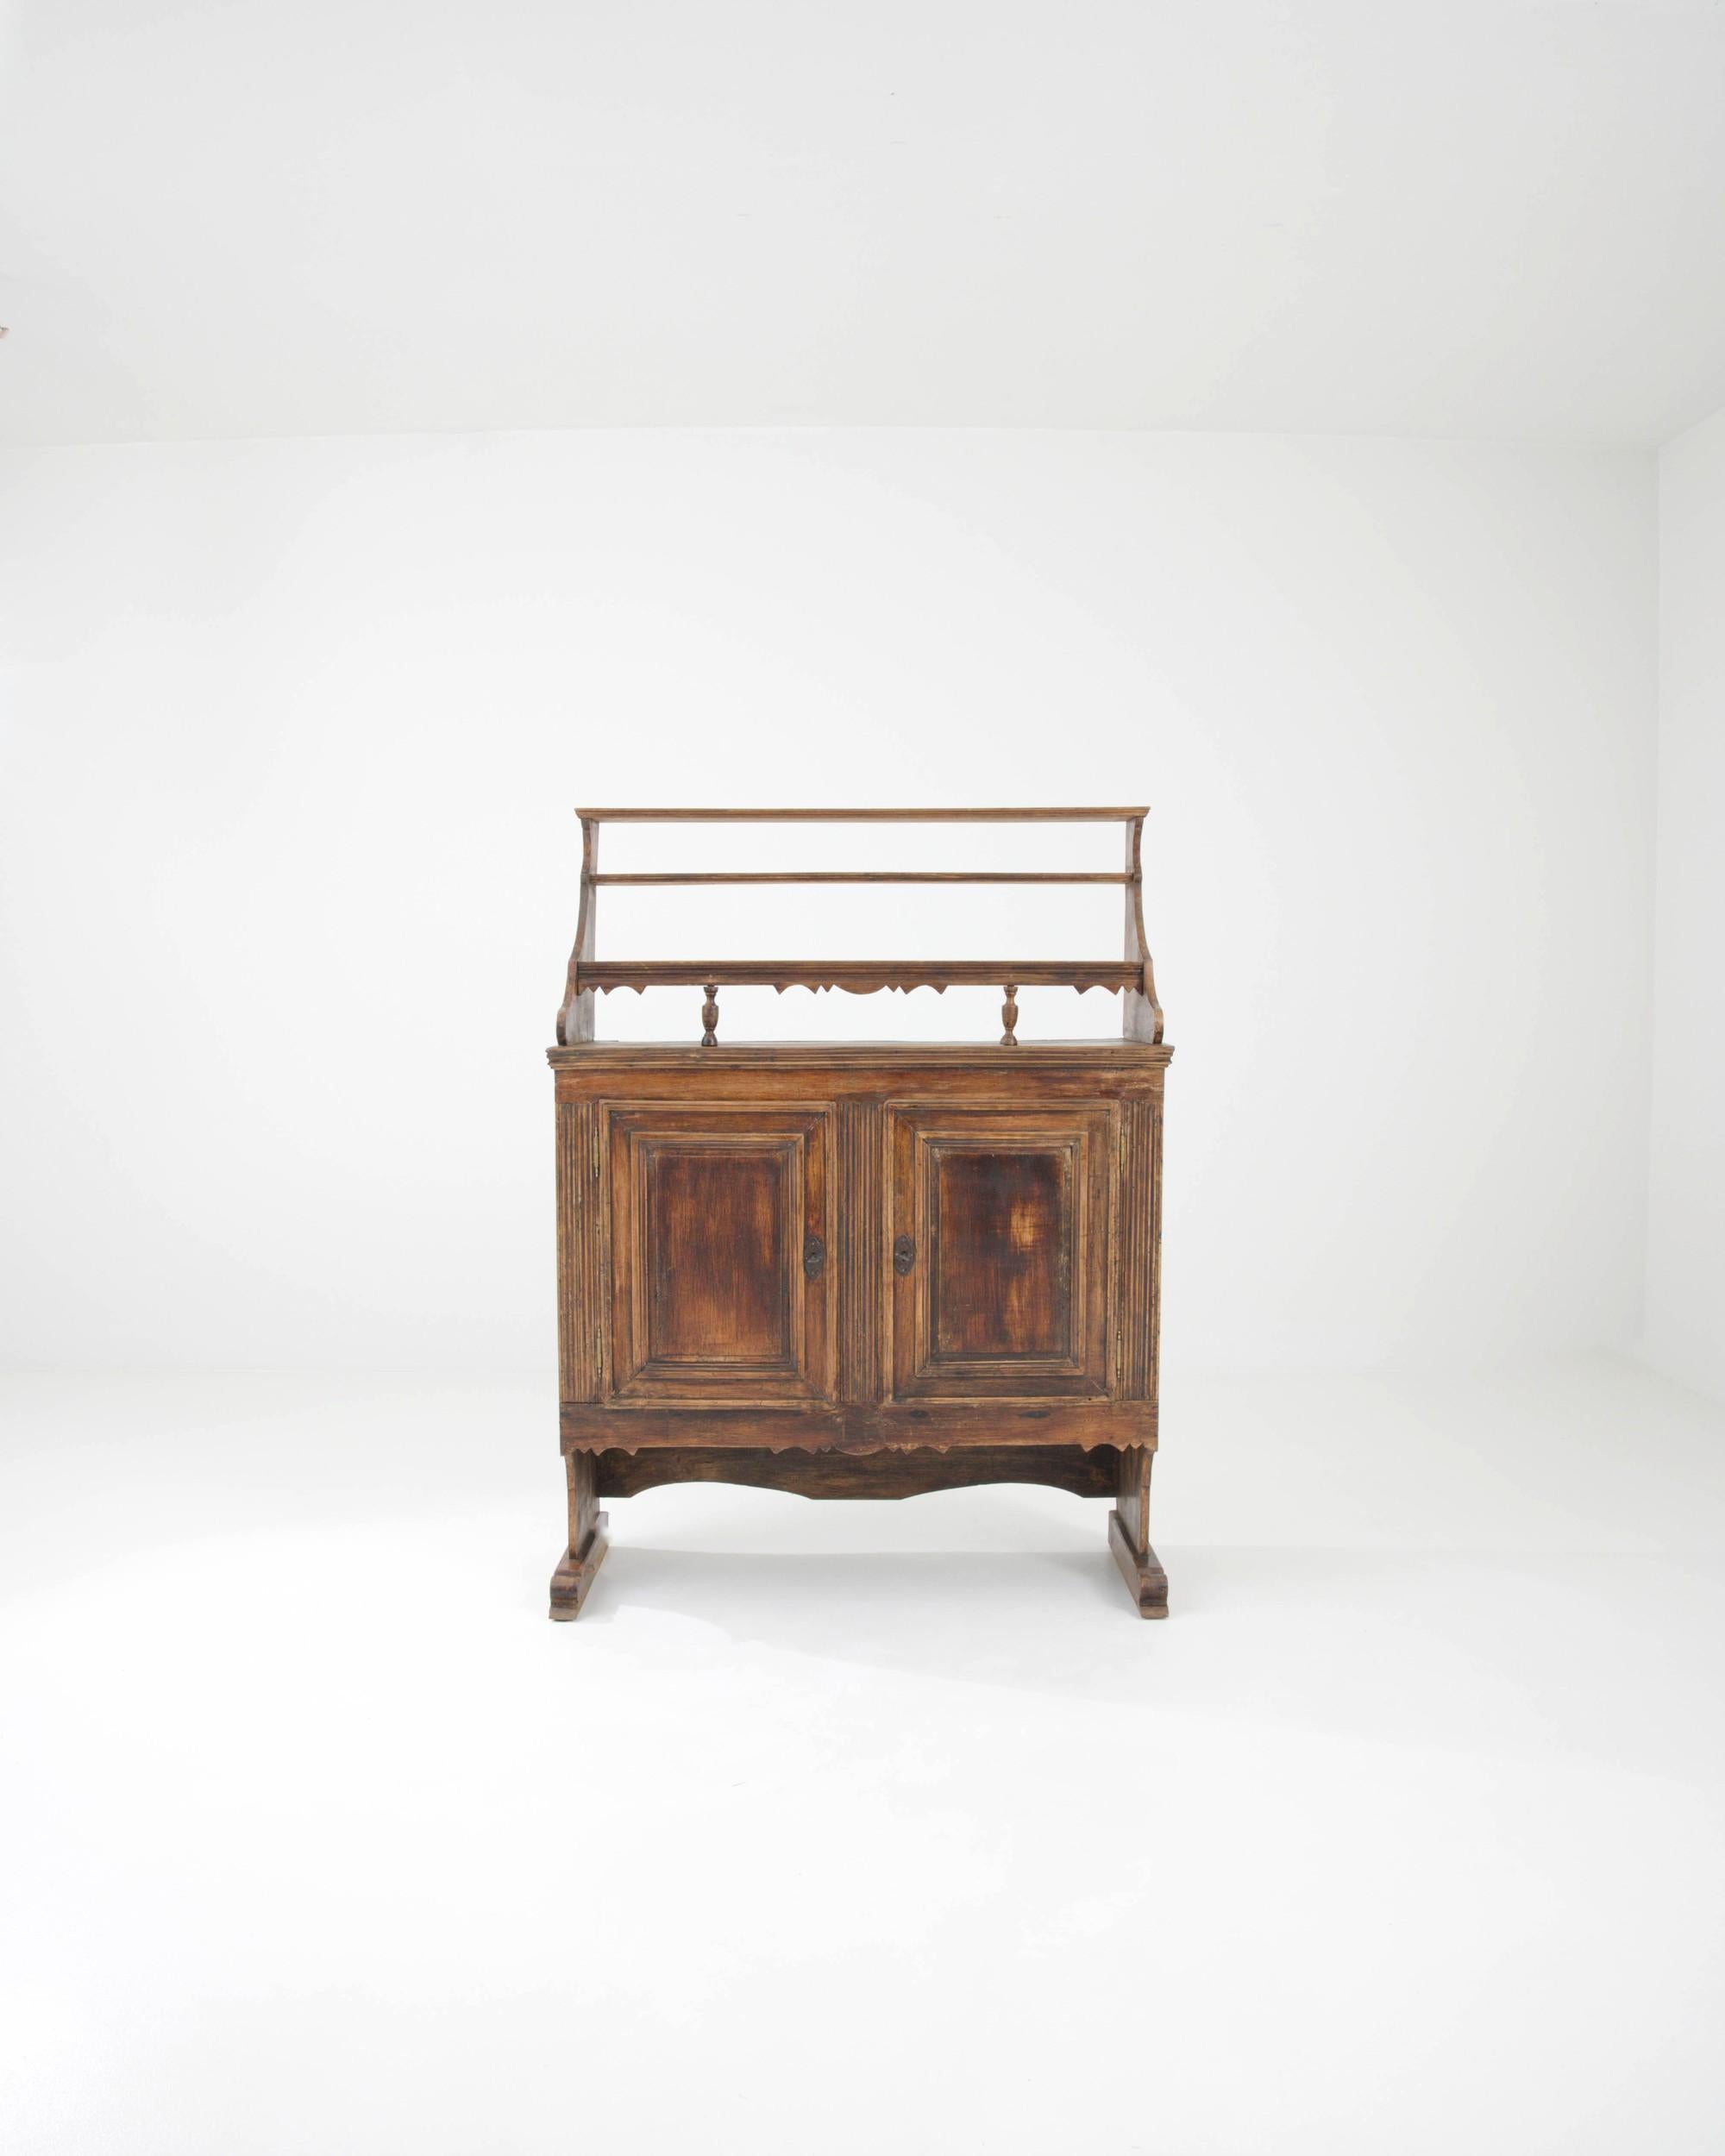 With its handsome design and rich original patina, this antique wooden cupboard offers a distinguished period piece. Hand-built in Germany in the 1800s, the composition combines generous storage space with a set of upper display shelves. Contoured